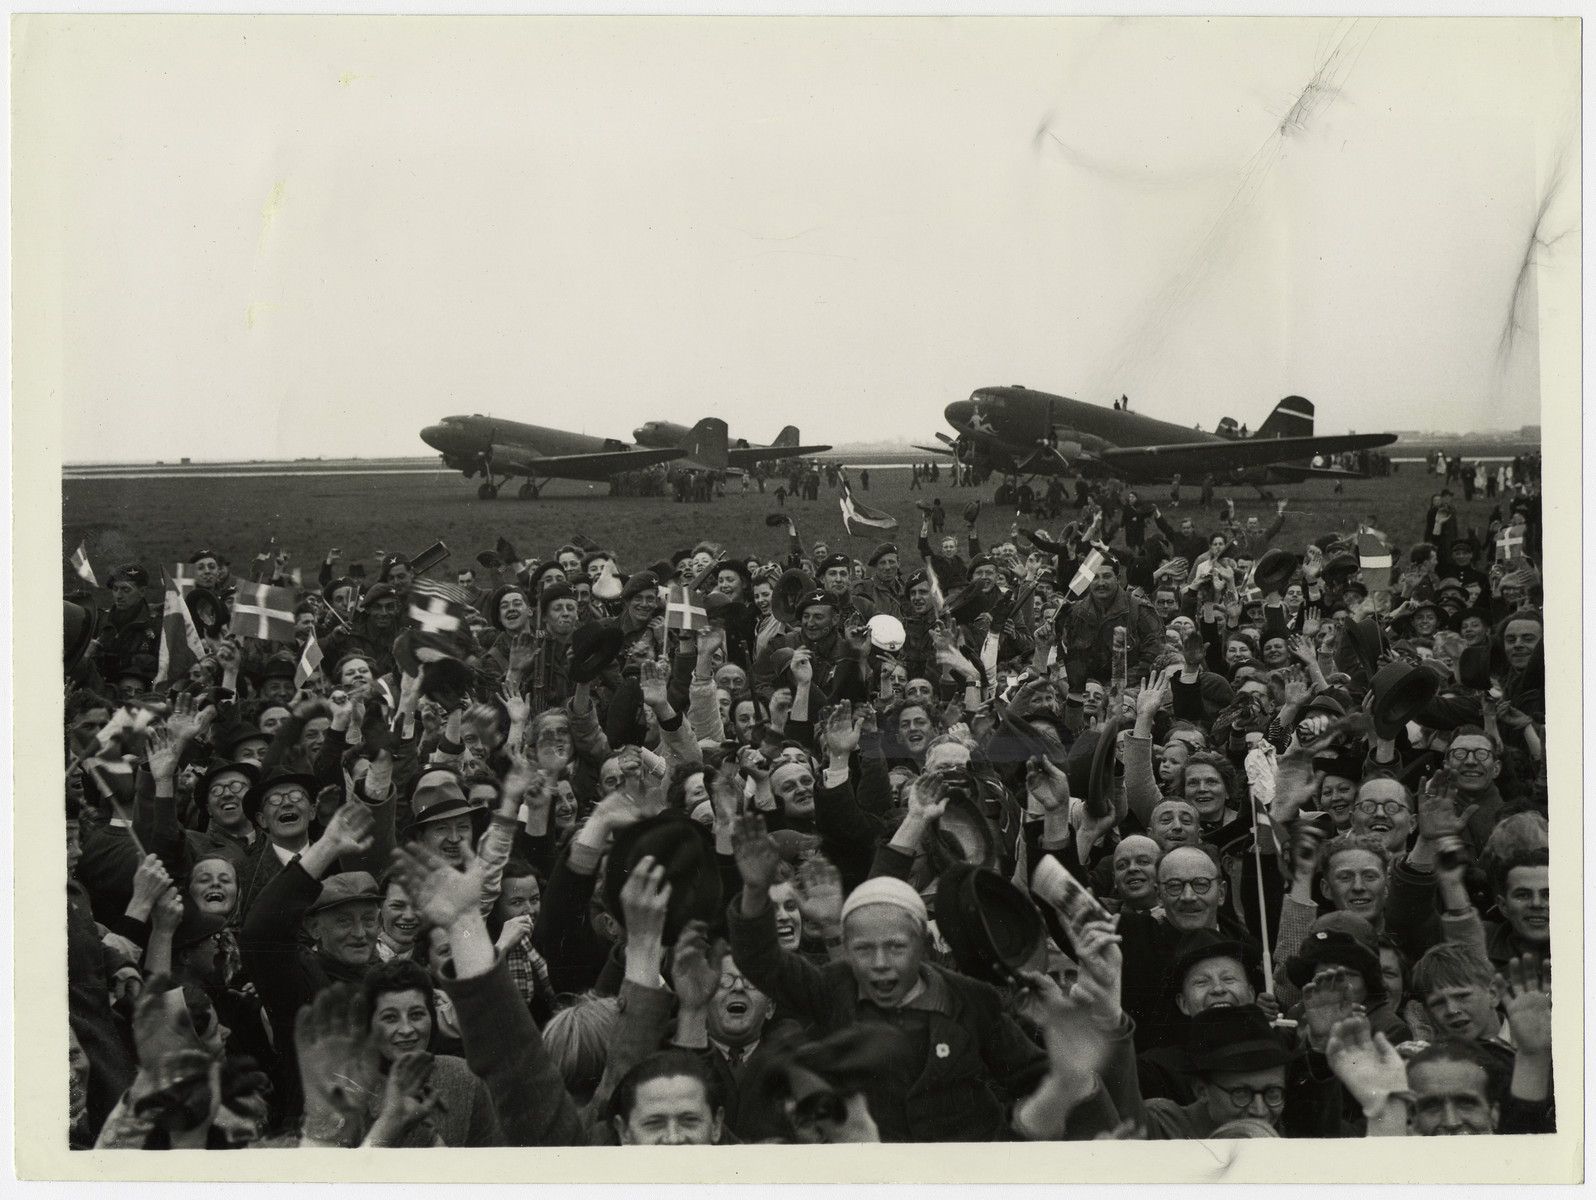 Official British photograph showing Danish civilians greeting the first British troops to land in Copenhagen.

The original caption reads: " The first British troops to land in Denmark were some of our Airborne troops, fresh from their race across Germany to link up with the Russians.
On the airfield, crowds broke through the barriers, and carried airborne troops shoulder high from their planes."
(NO. 8U 5339/A), WAR OFFICE PHOTO, CROWN COPYRIGHT RESERVED